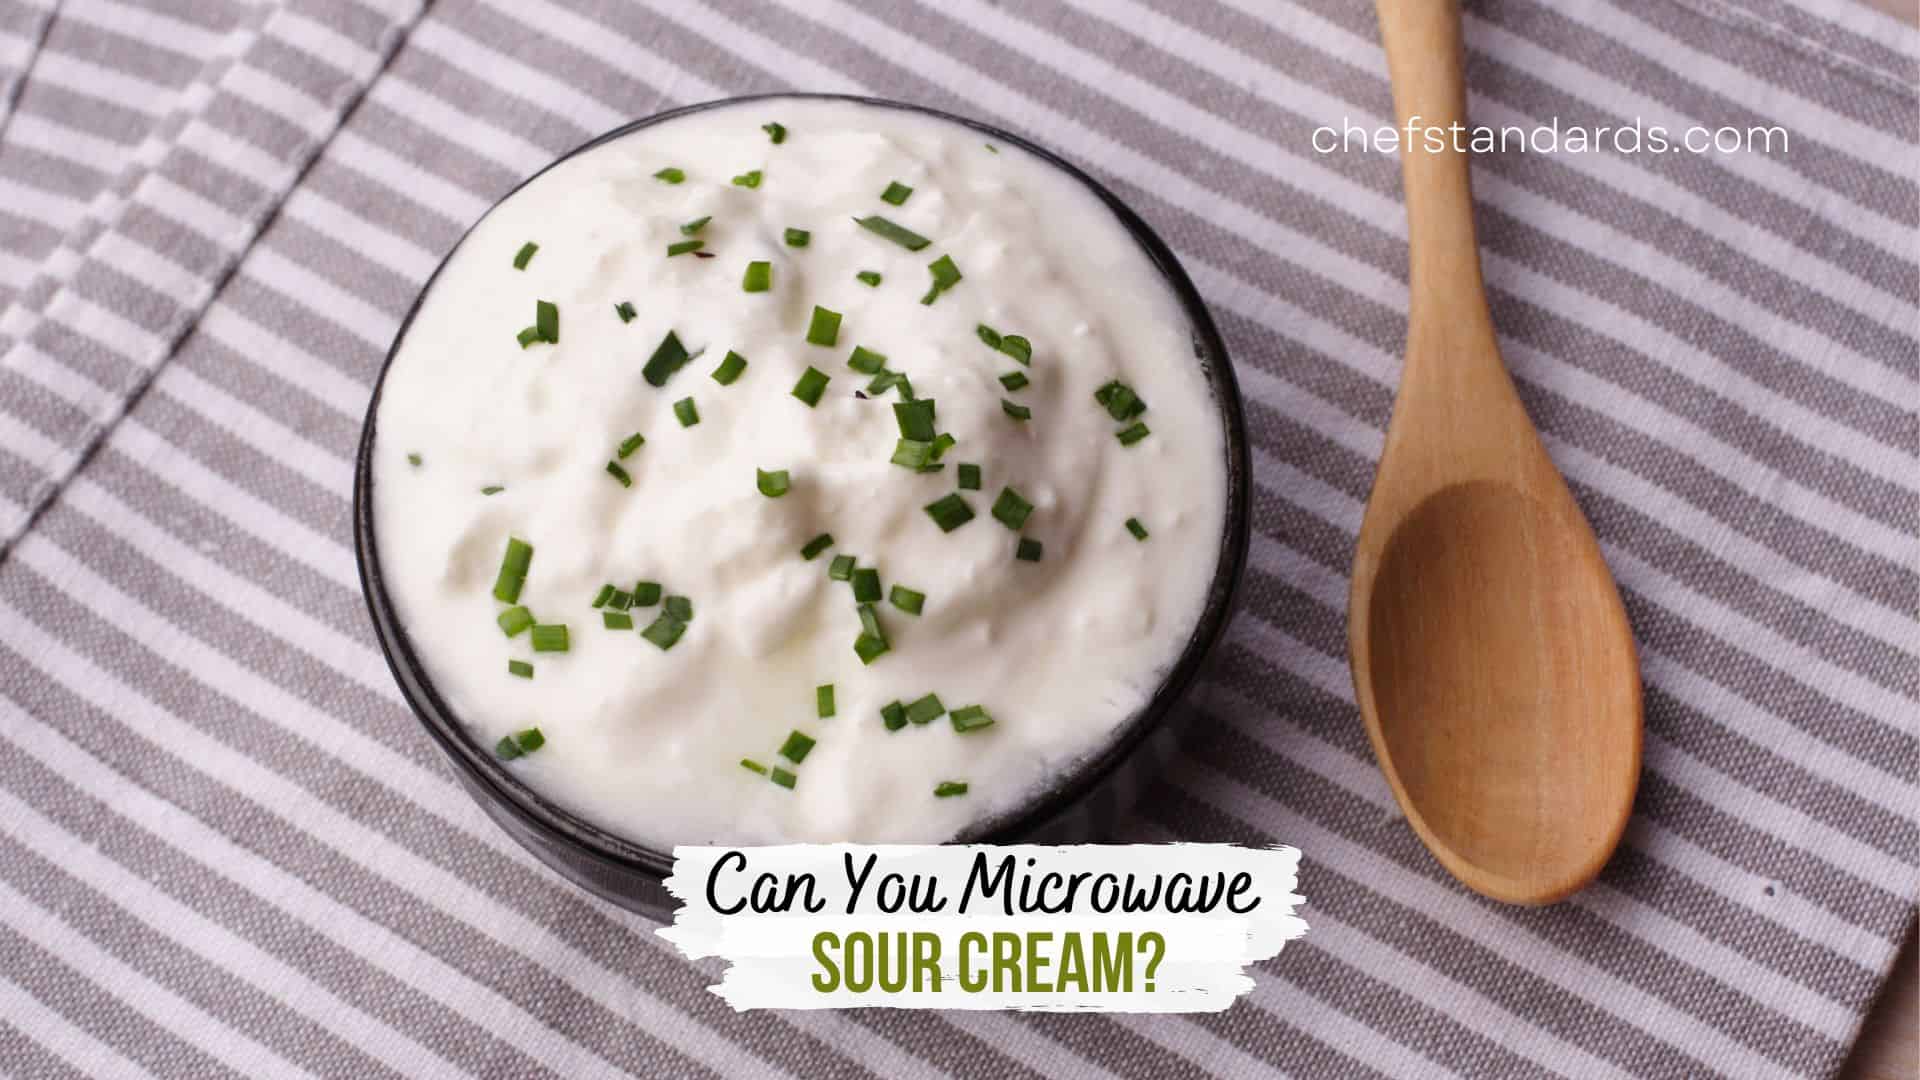 Can You Microwave Sour Cream